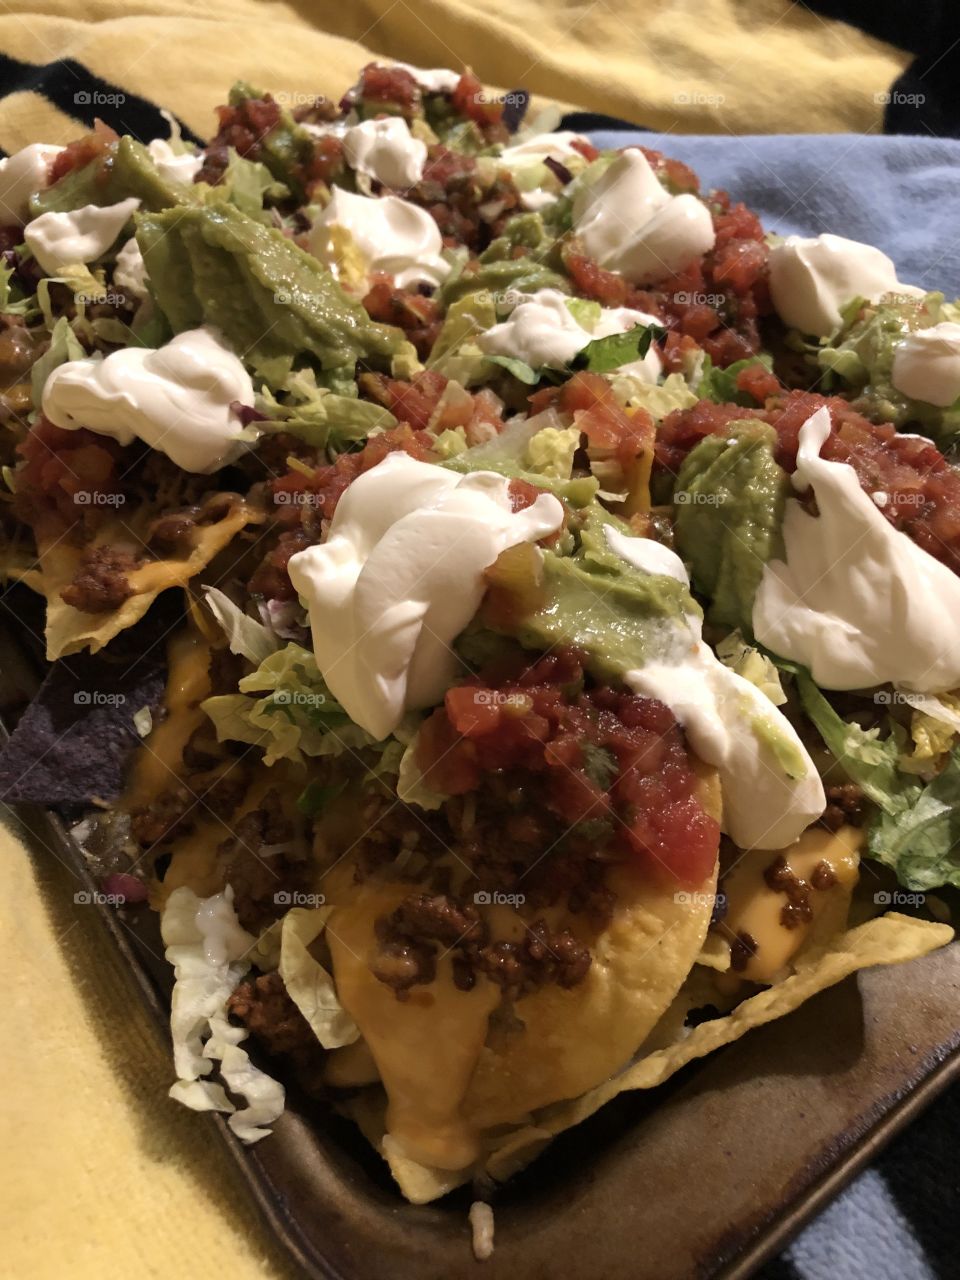 Best nachos ever warm spicy crunchy flavorful delicious dinner with my love that’s how you make a tummy full